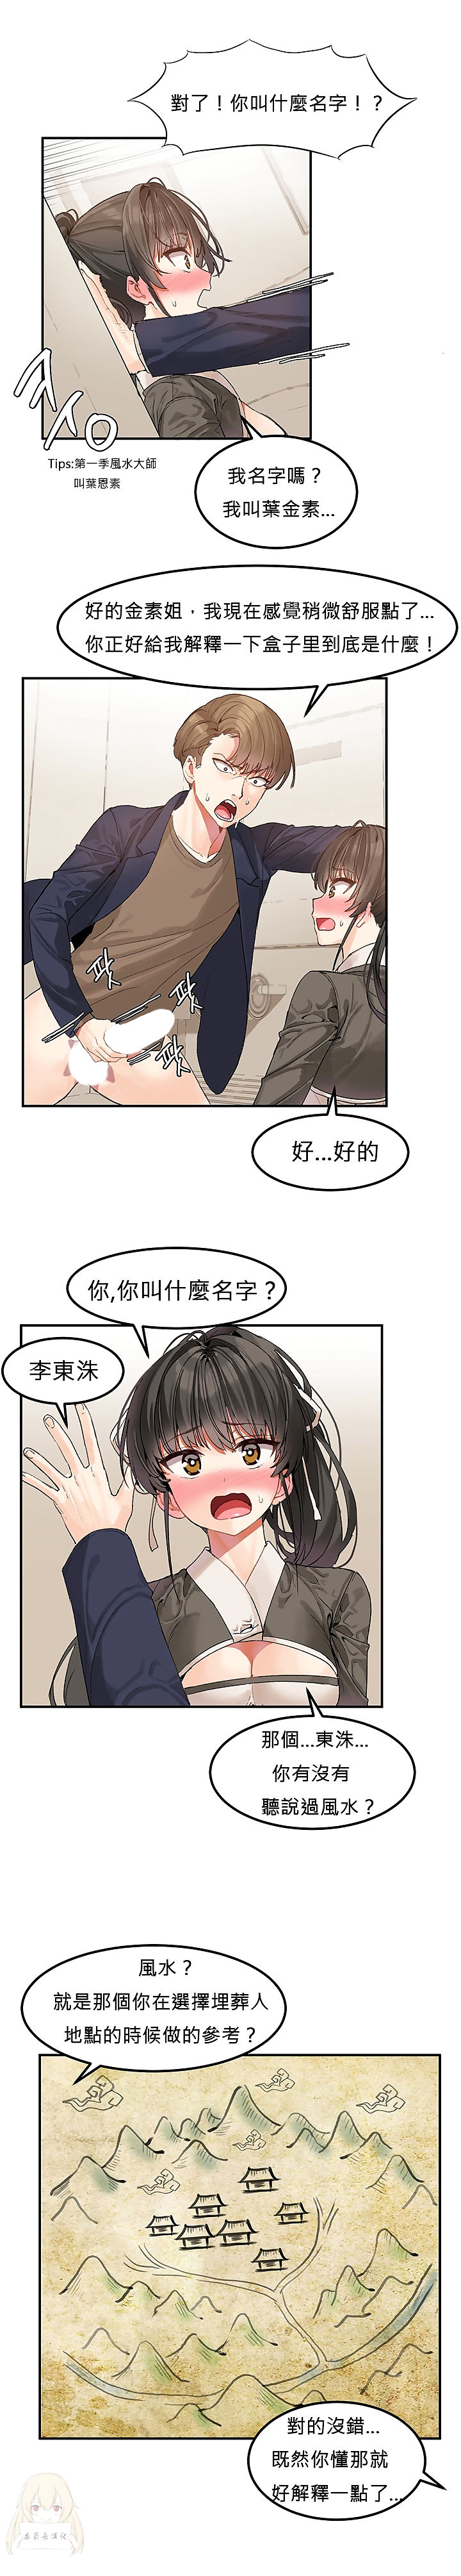 Hahris Lumpy Star Ch.1~4 【委員長個人漢化】持續更新） - part 2 page 1